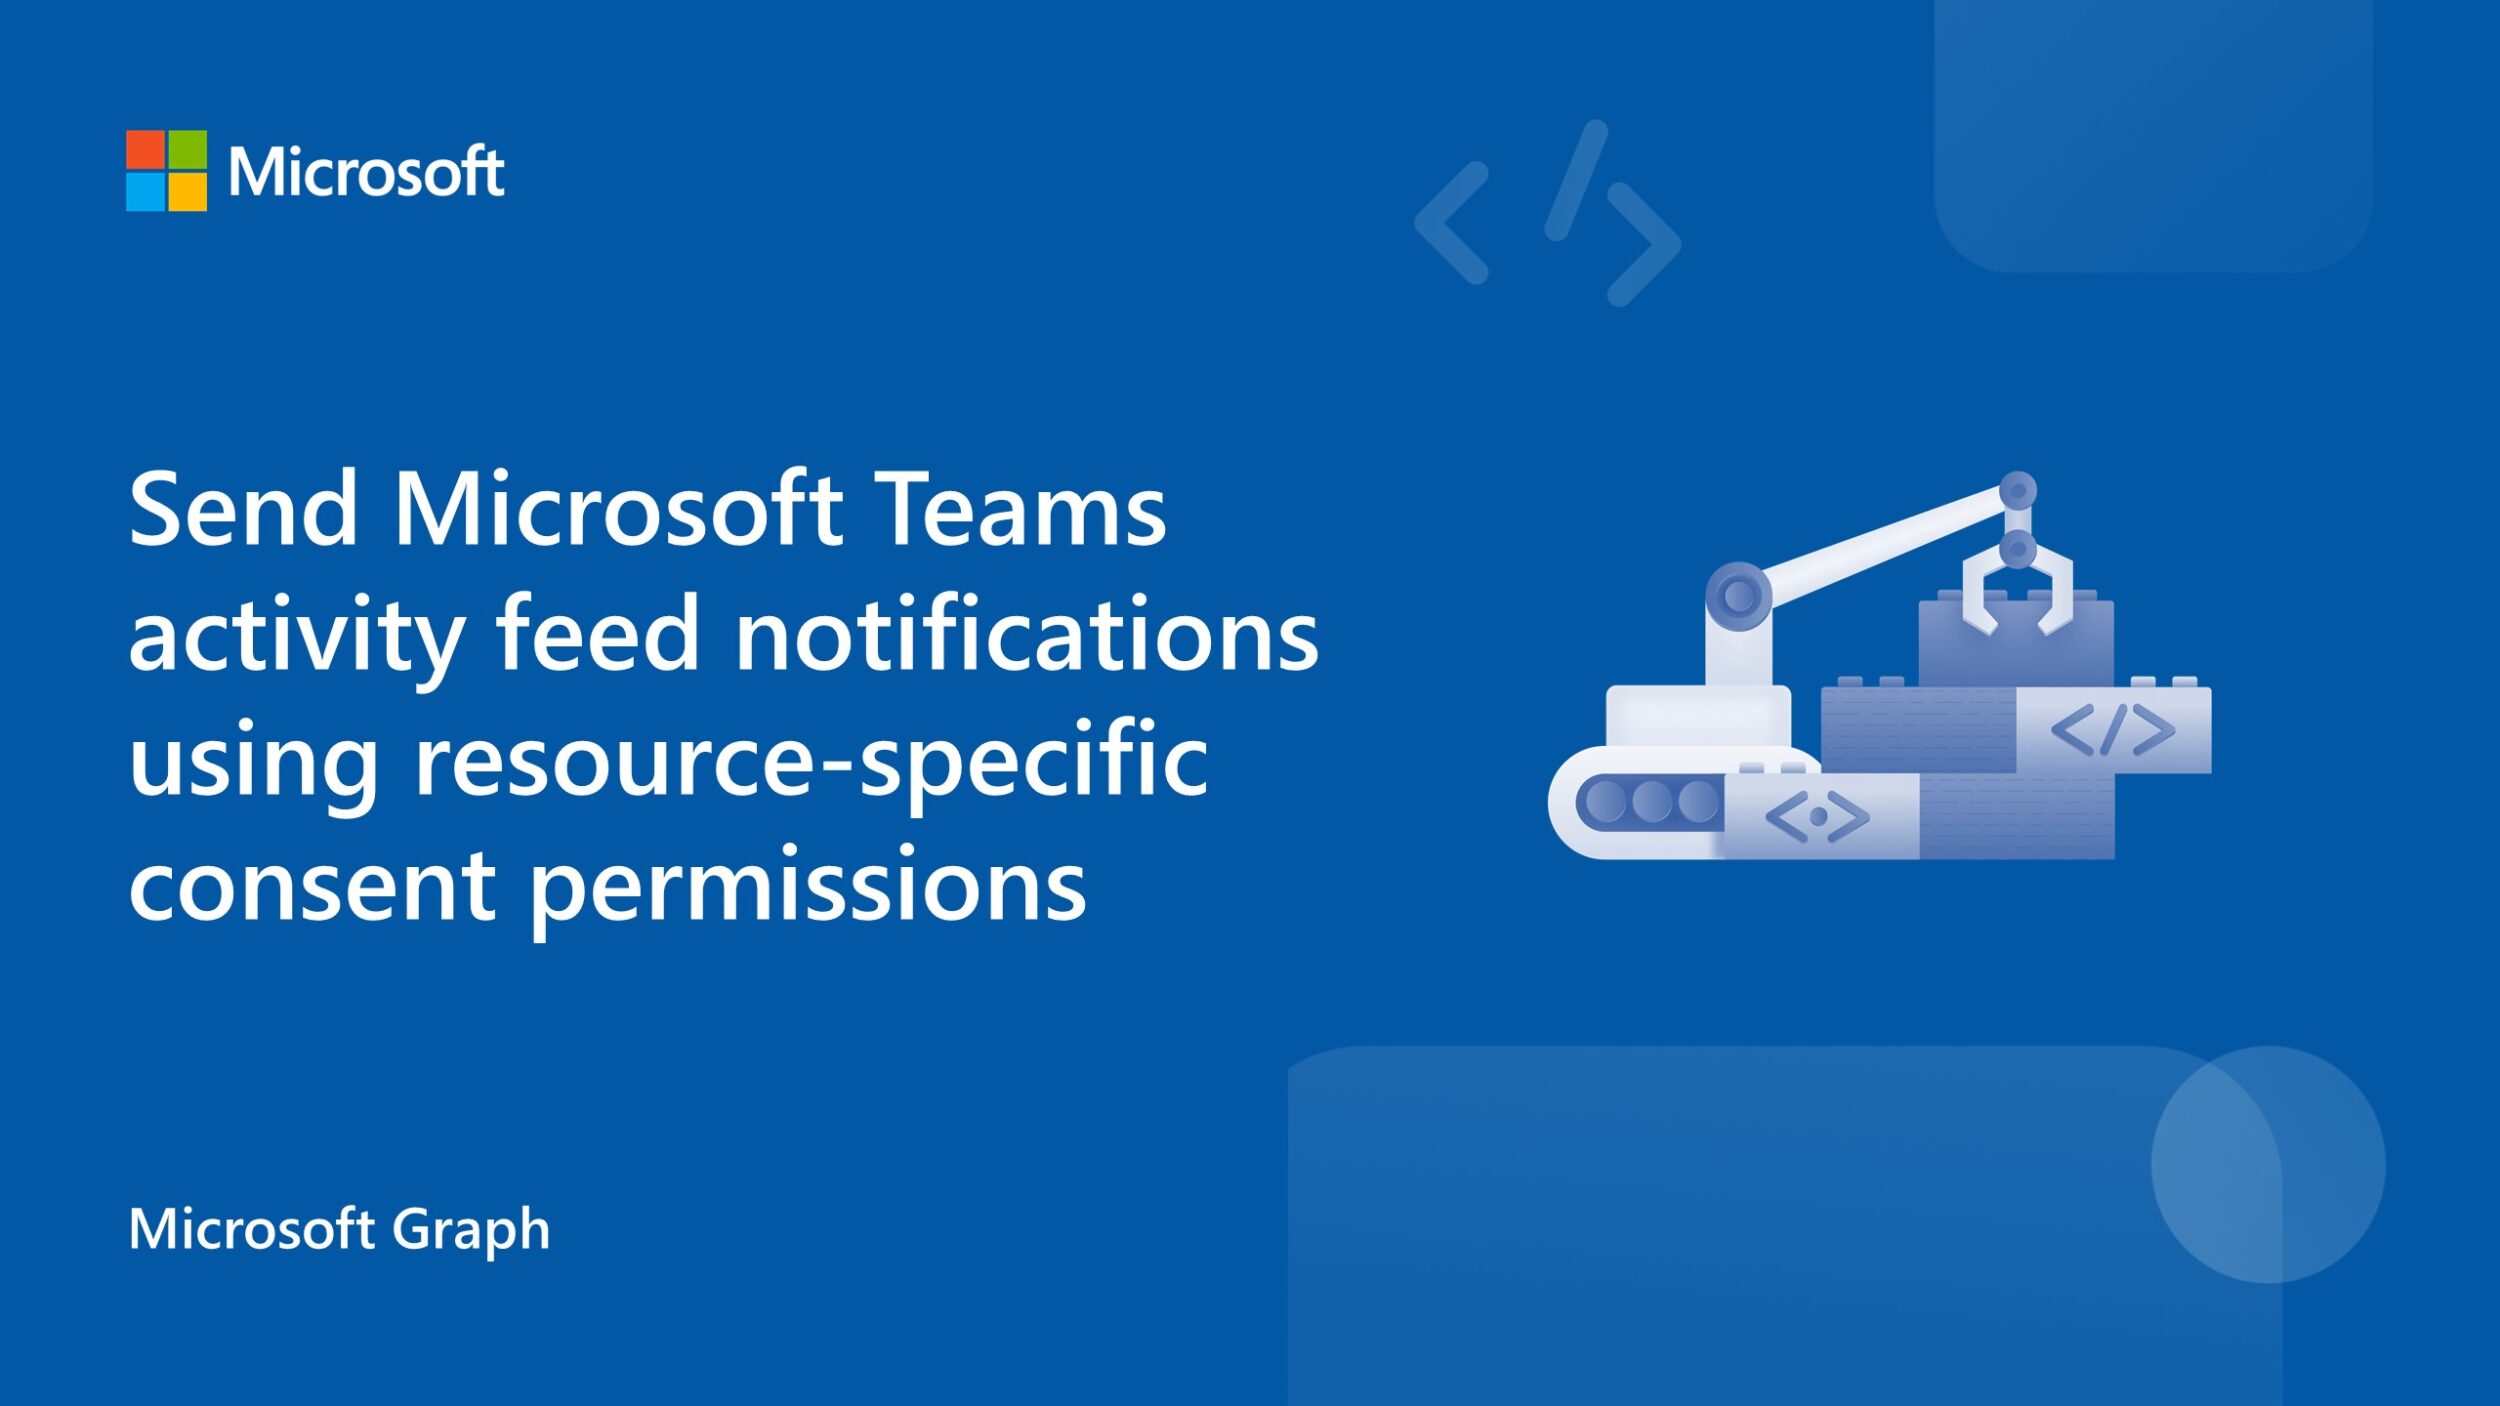 Send Teams activity notifications using new resource-specific consent permissions